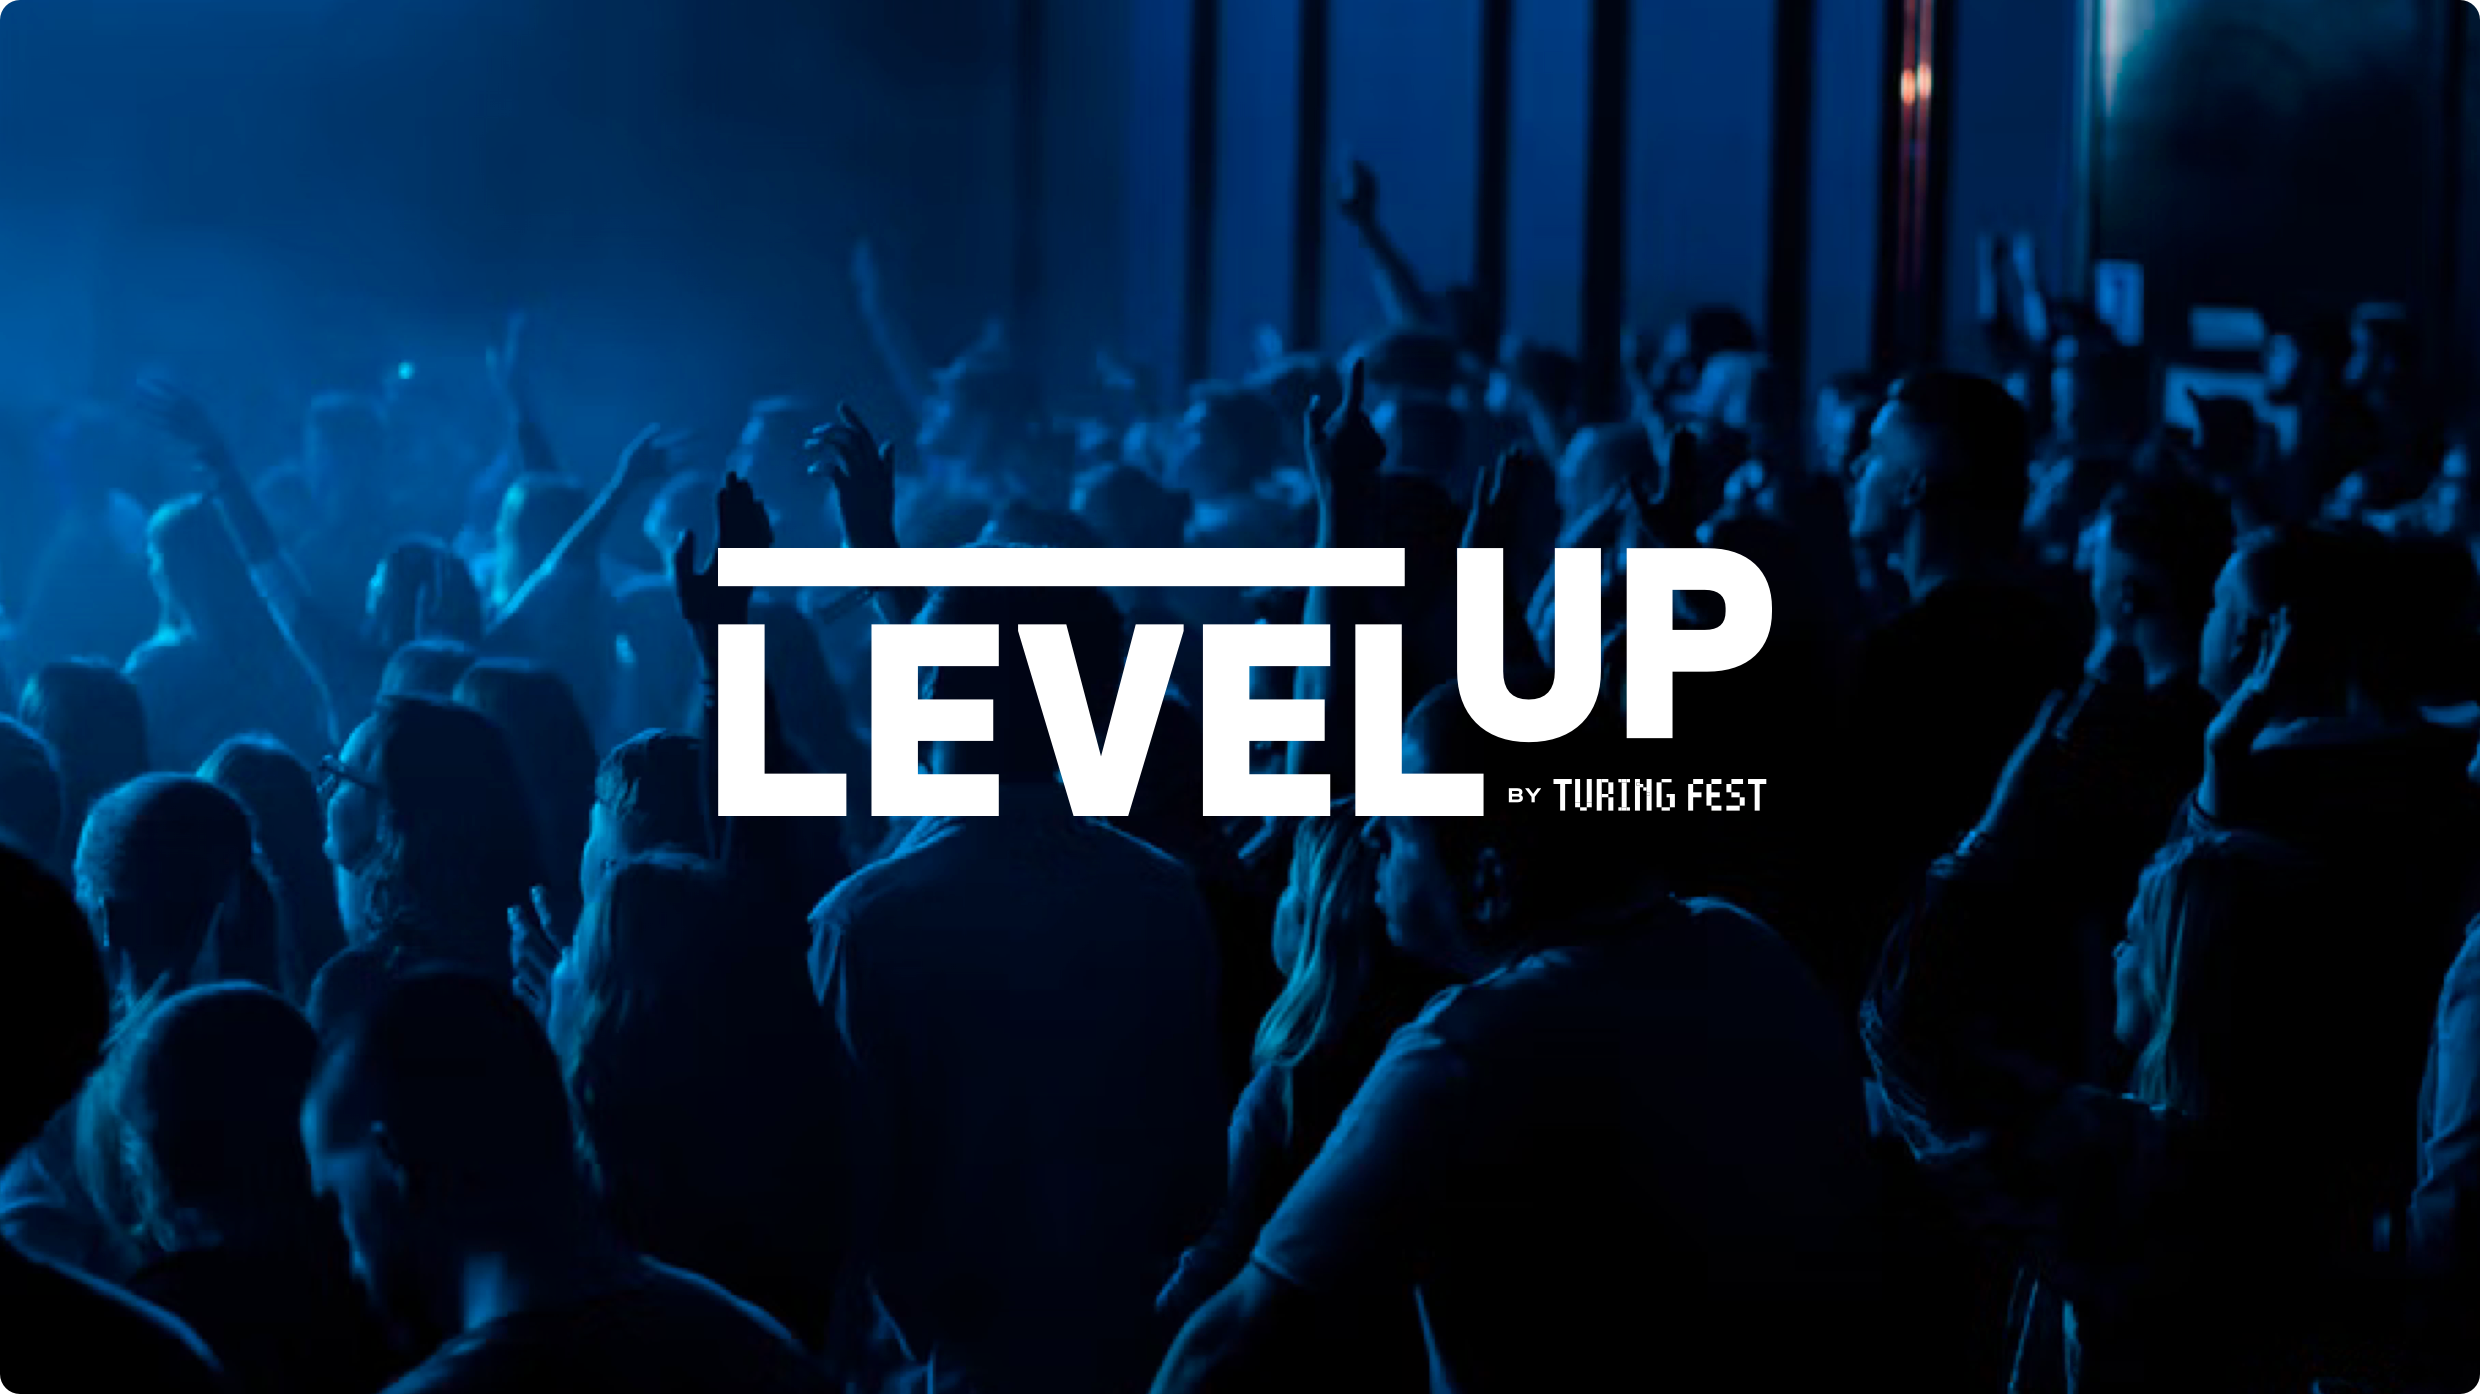 A concert crowd shot with blue lighting, overlaid with the “Level Up By Turing Fest” logo